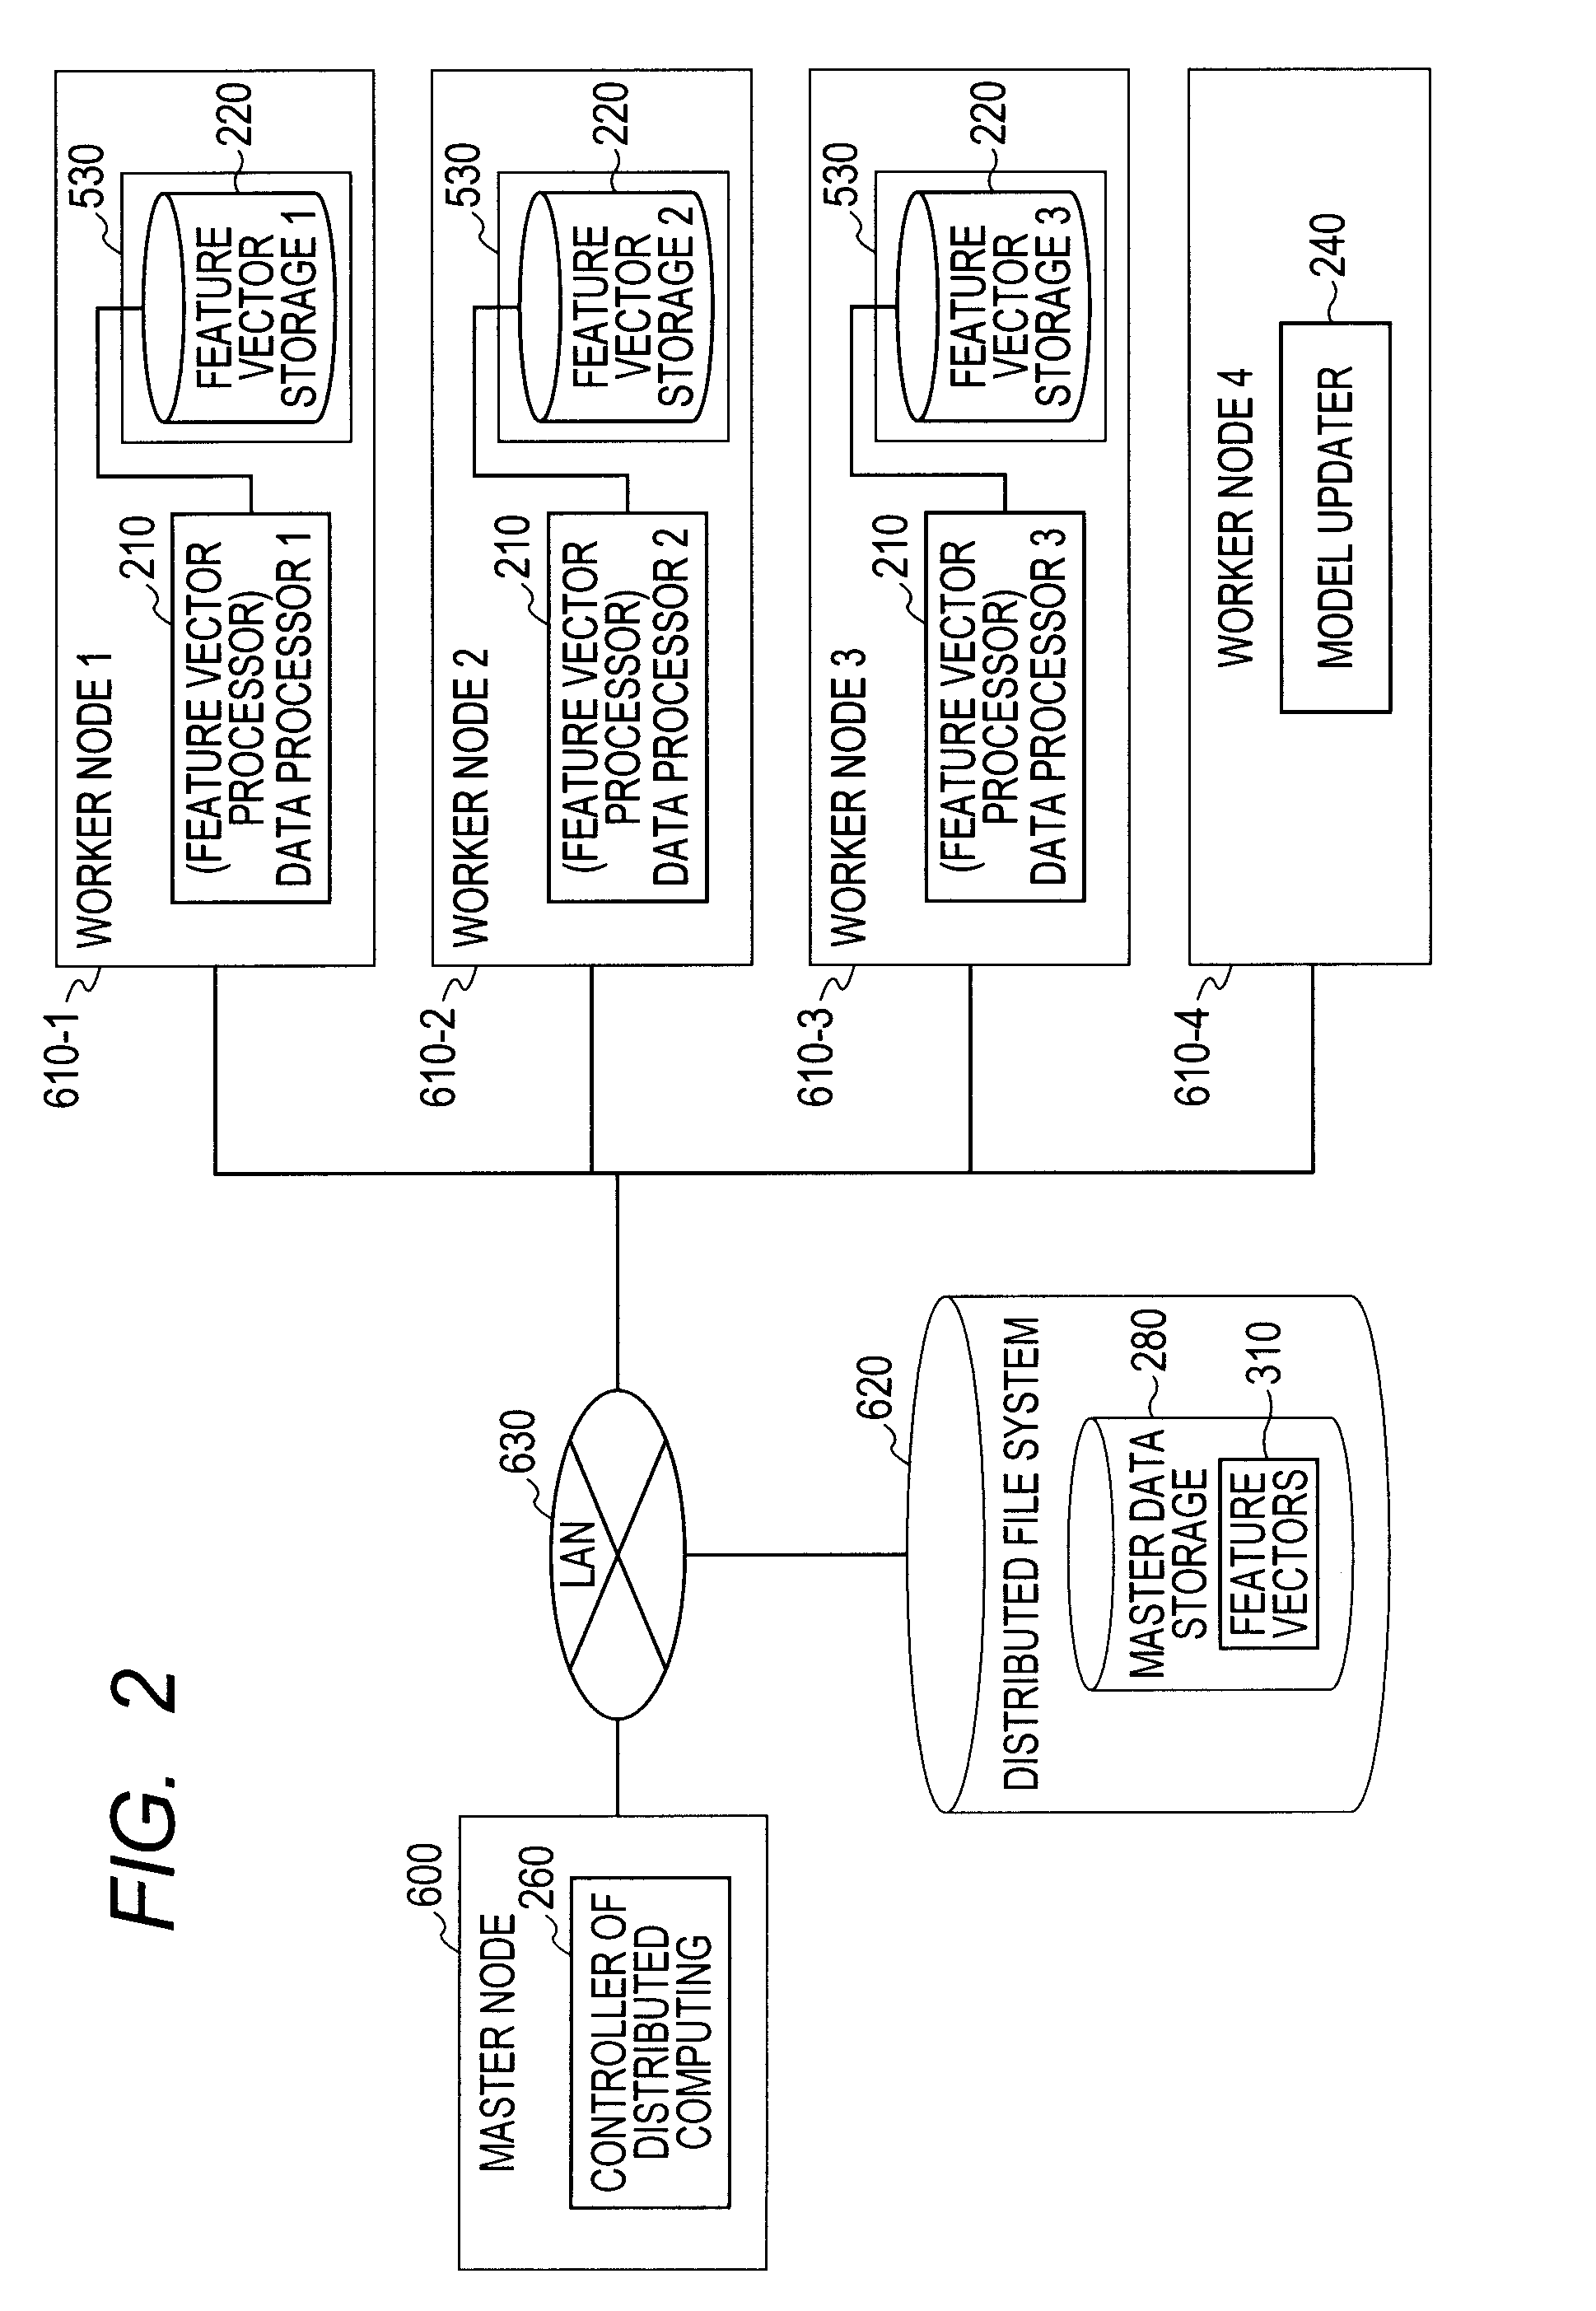 Distributed computing system for parallel machine learning